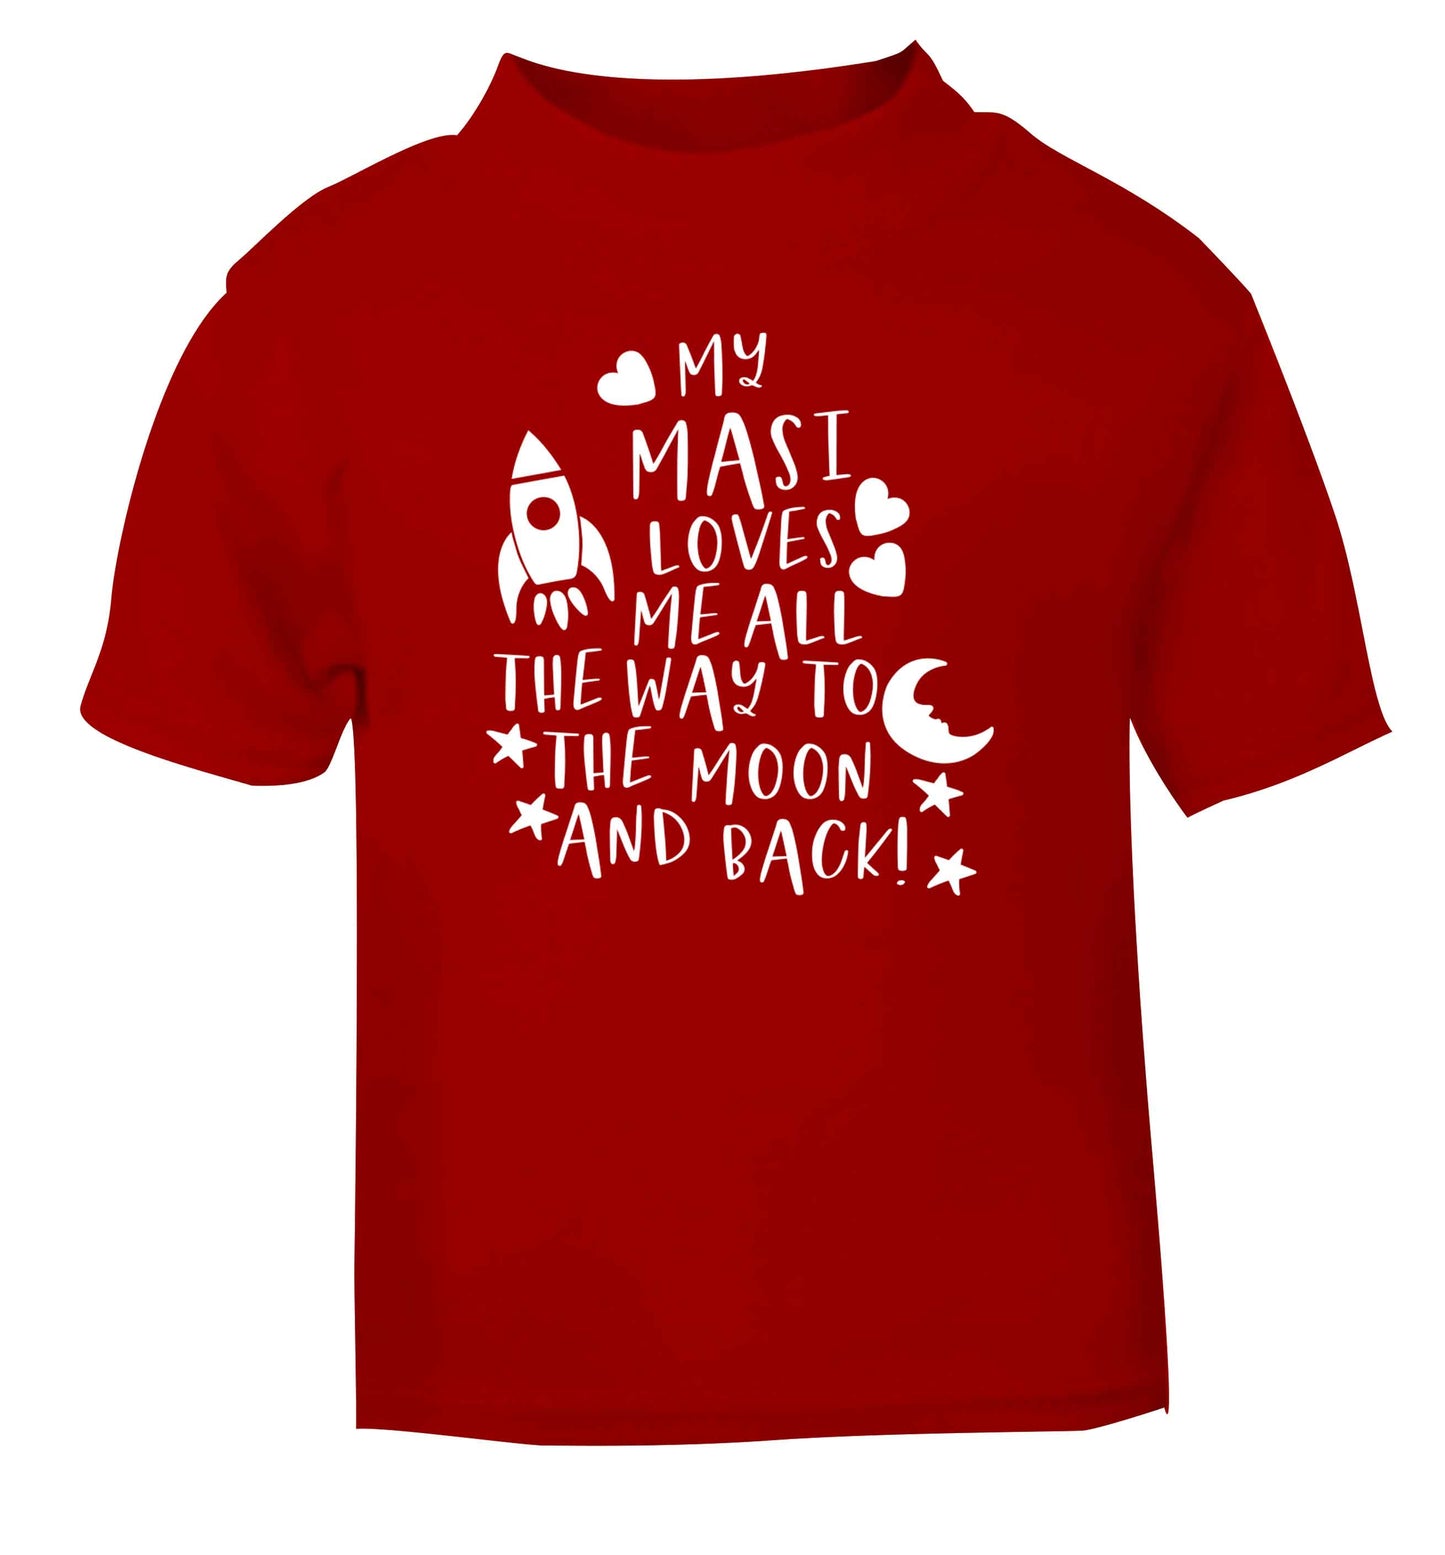 My masi loves me all the way to the moon and back red Baby Toddler Tshirt 2 Years